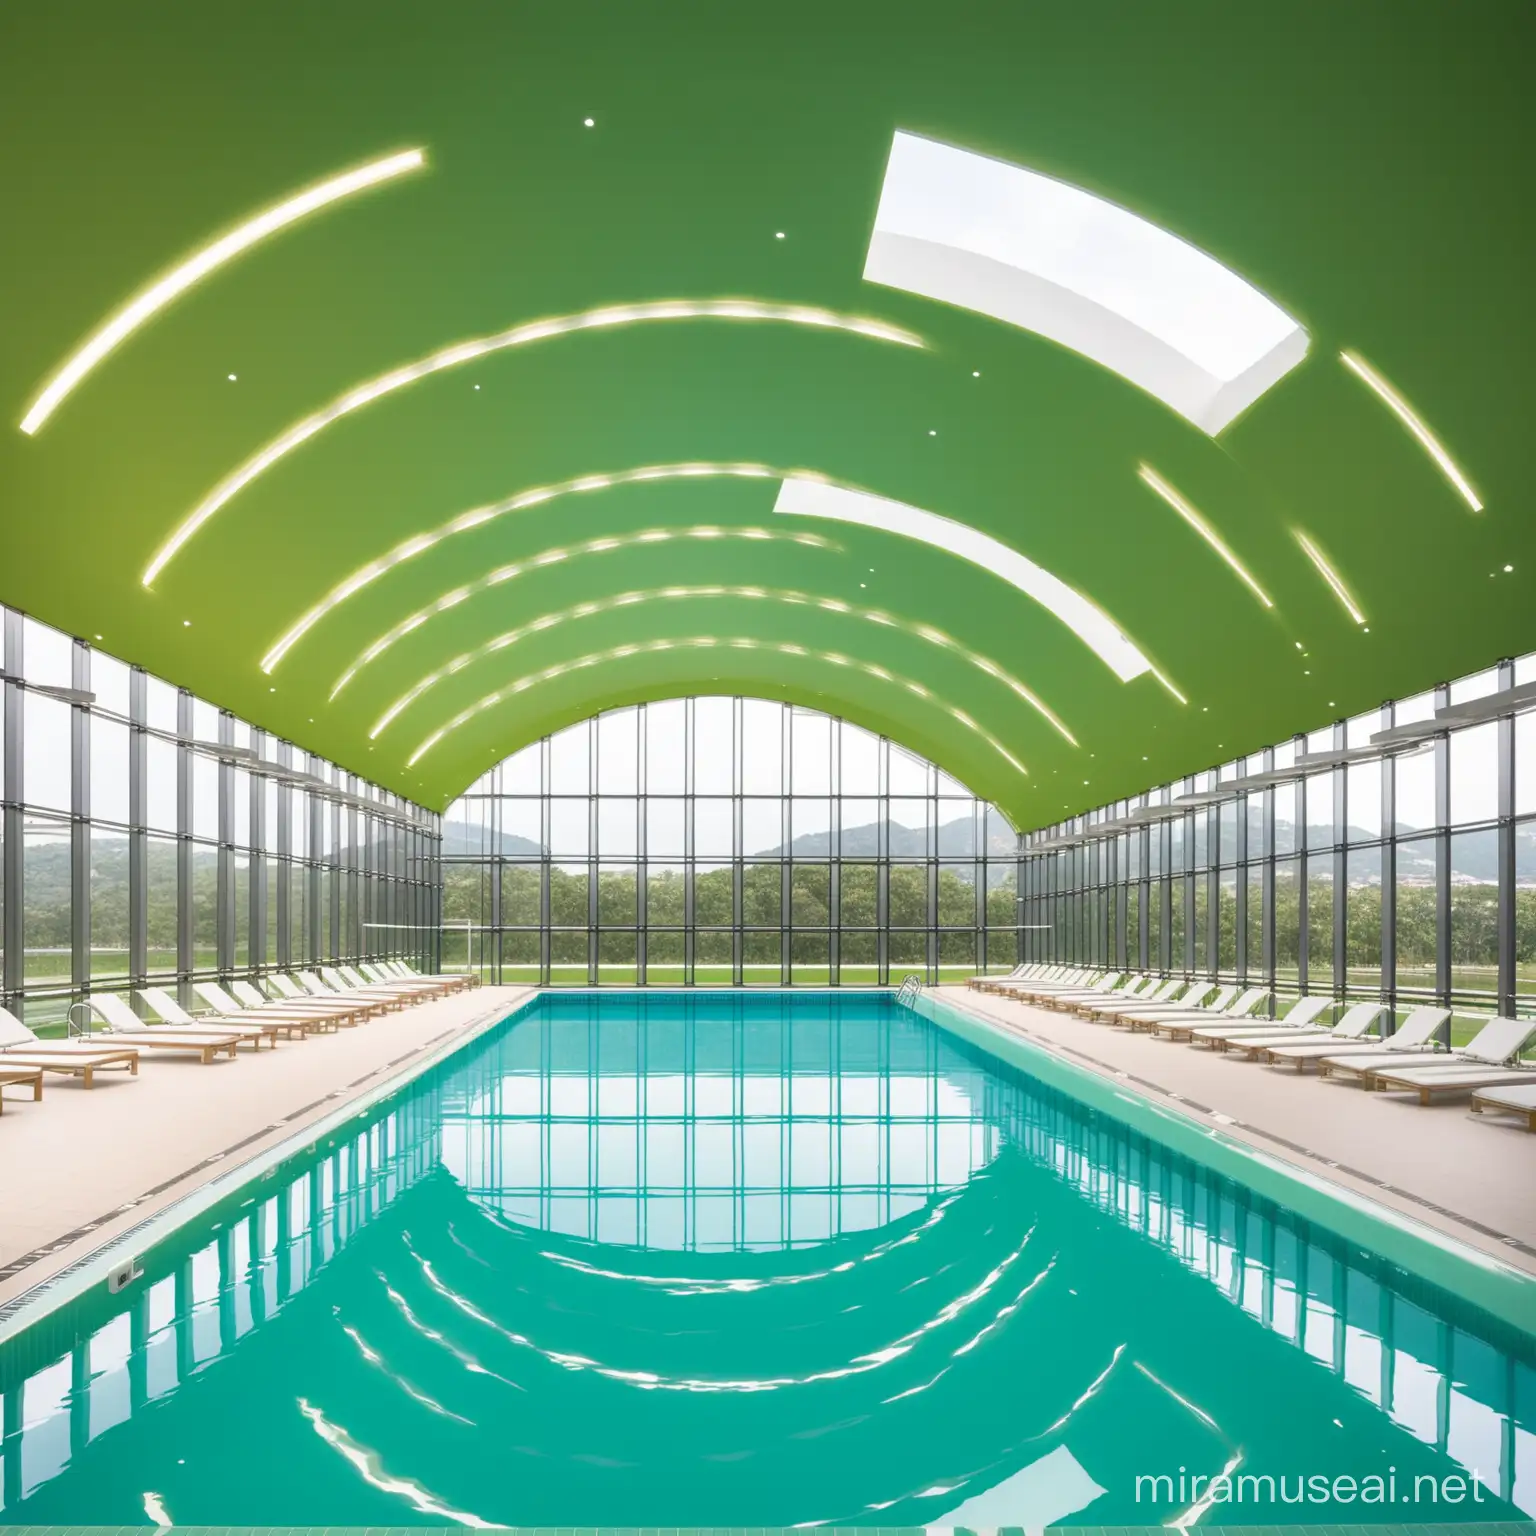 An indoor swimming pool with associated wellness. It must be a green building where you can see it inside by the 50 m pool